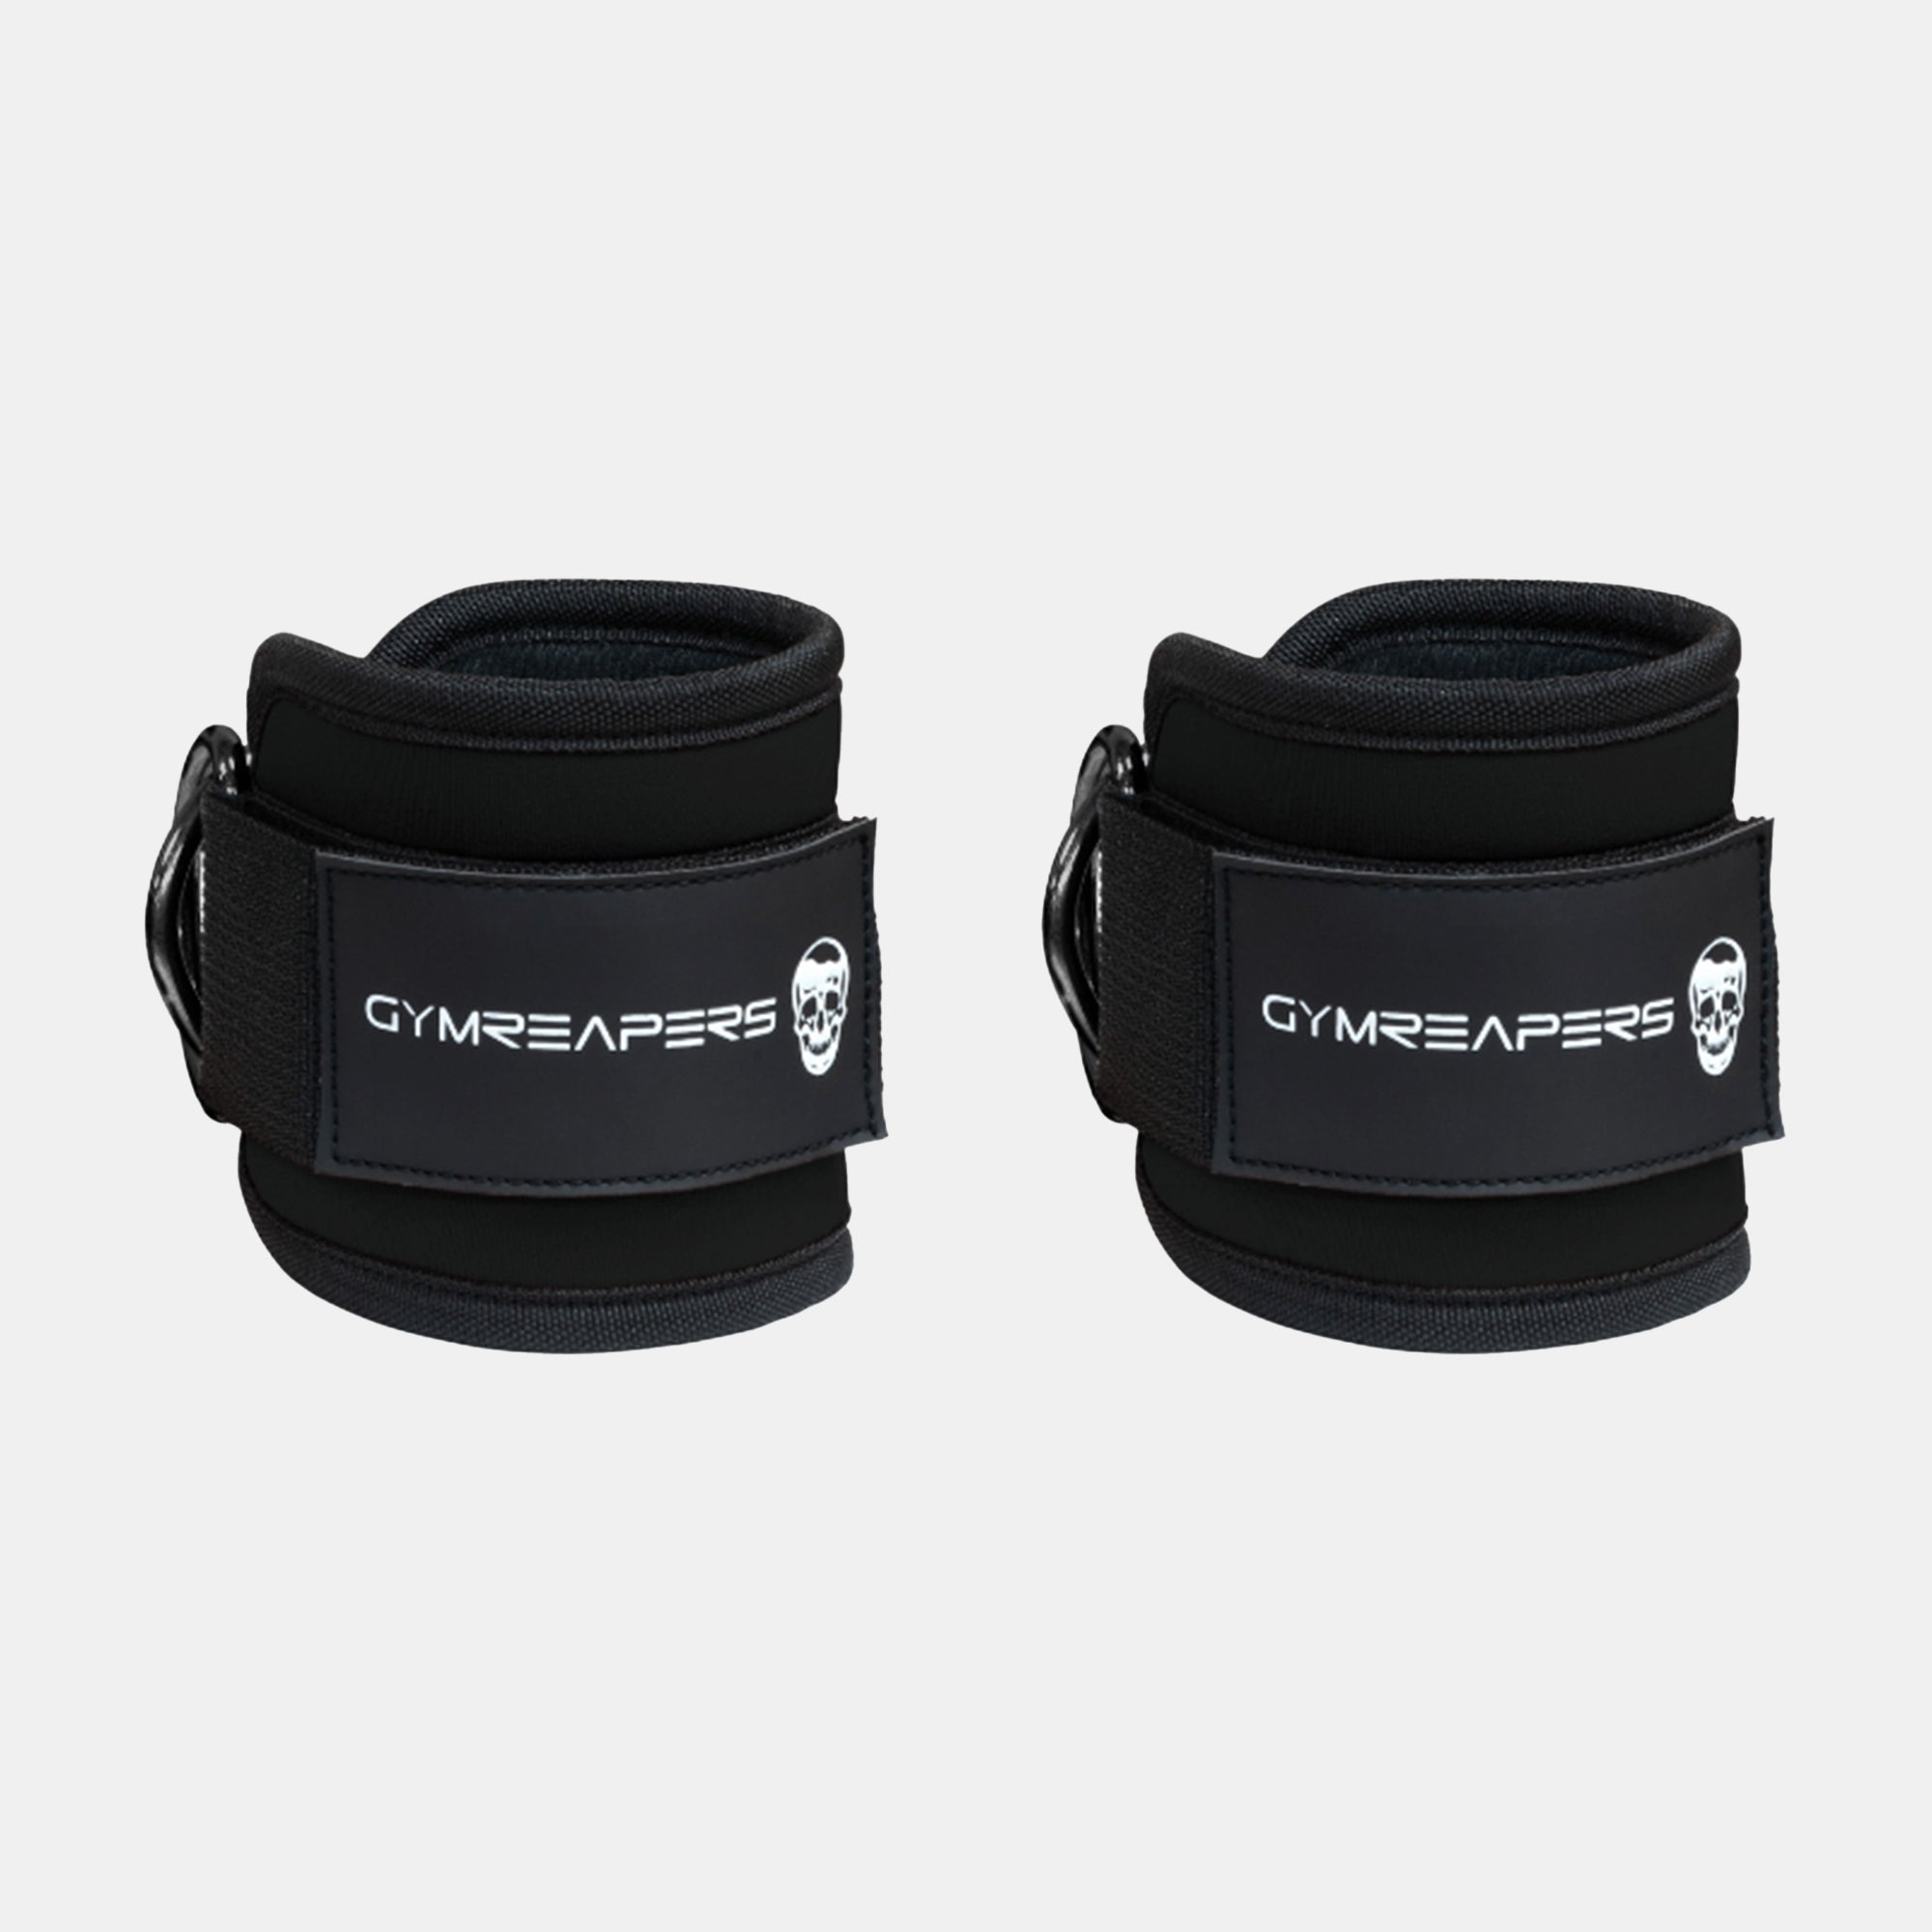 ankle straps pair black product